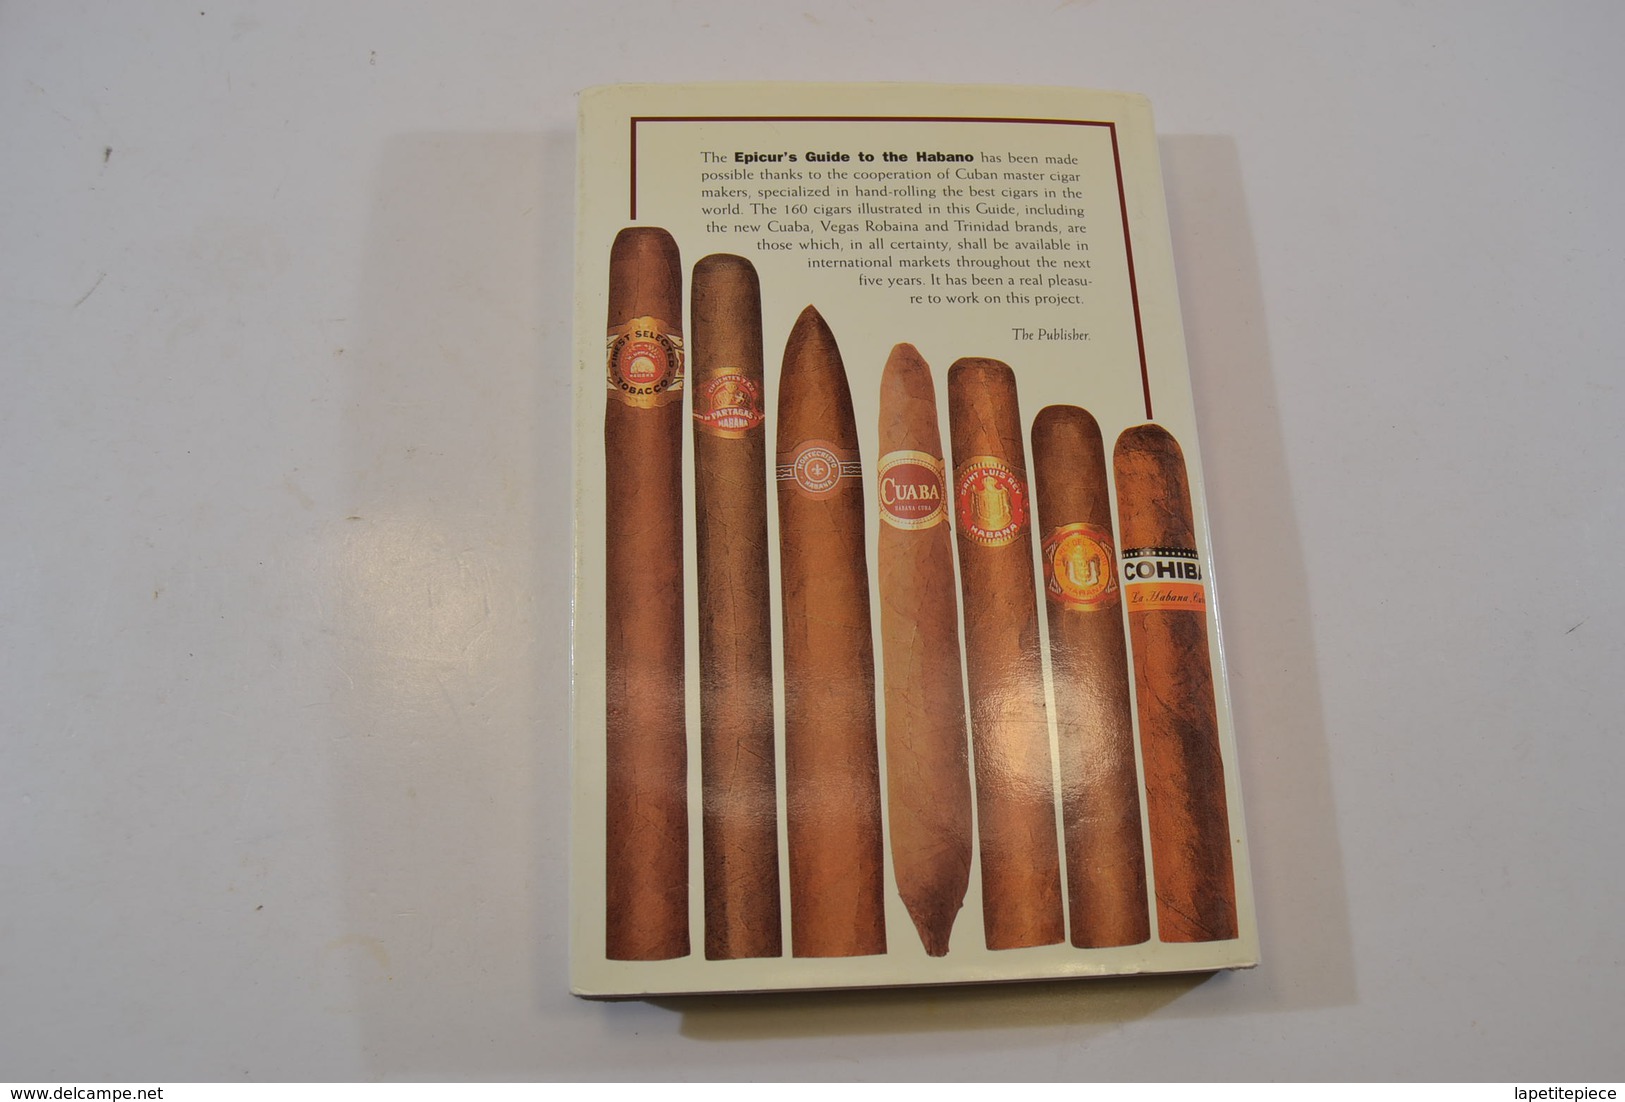 Livre / Guide cigares Cubains Habano / Cuba. Epicur's Guide to the Habano.